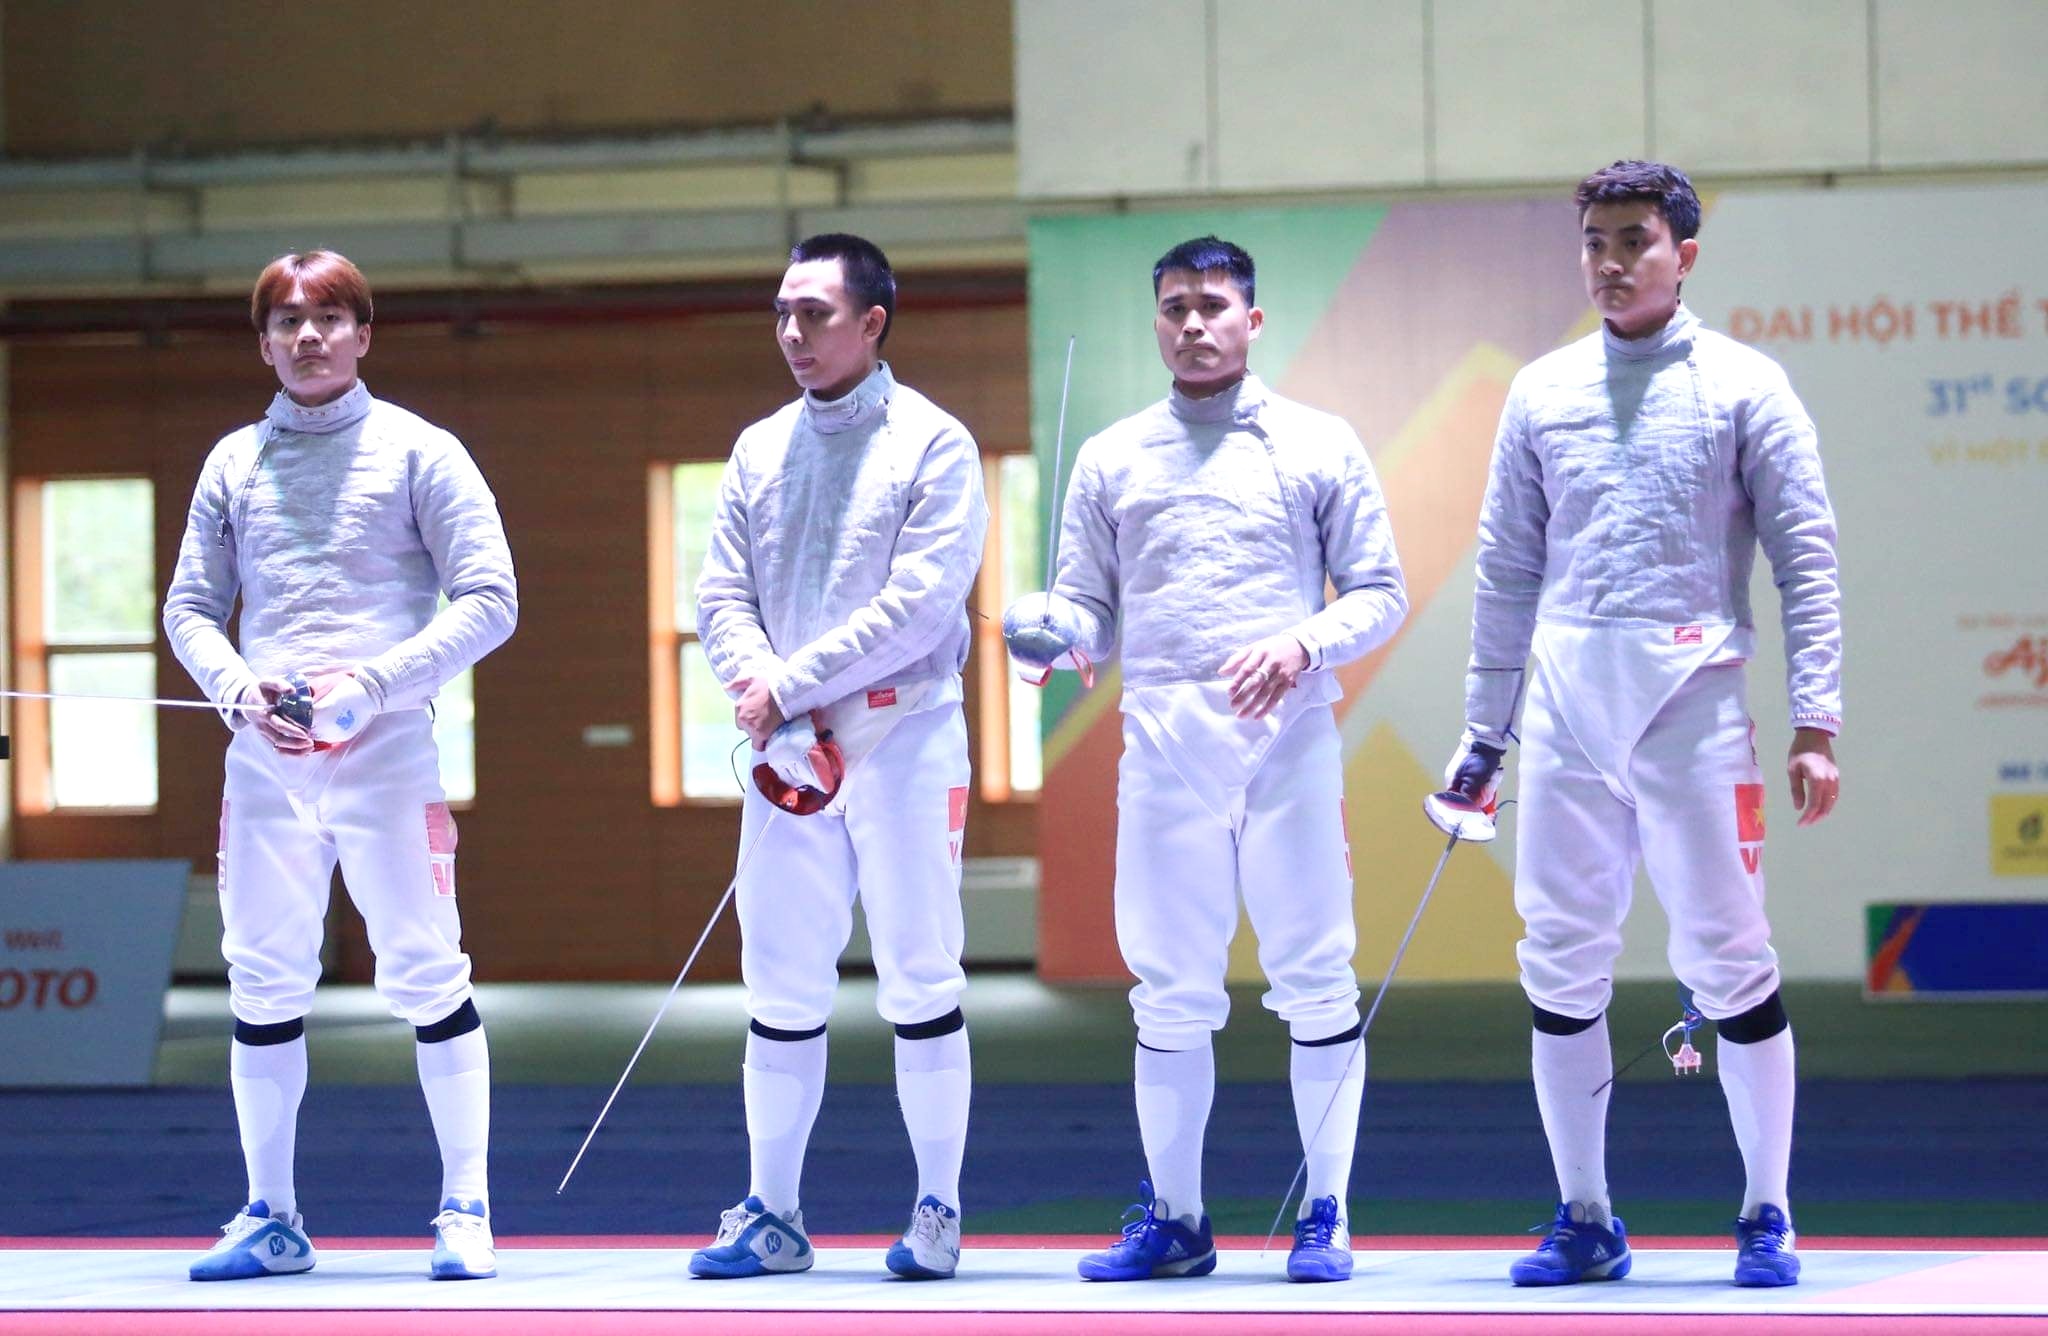 2 Vietnamese fencers attack each other with swords during practice